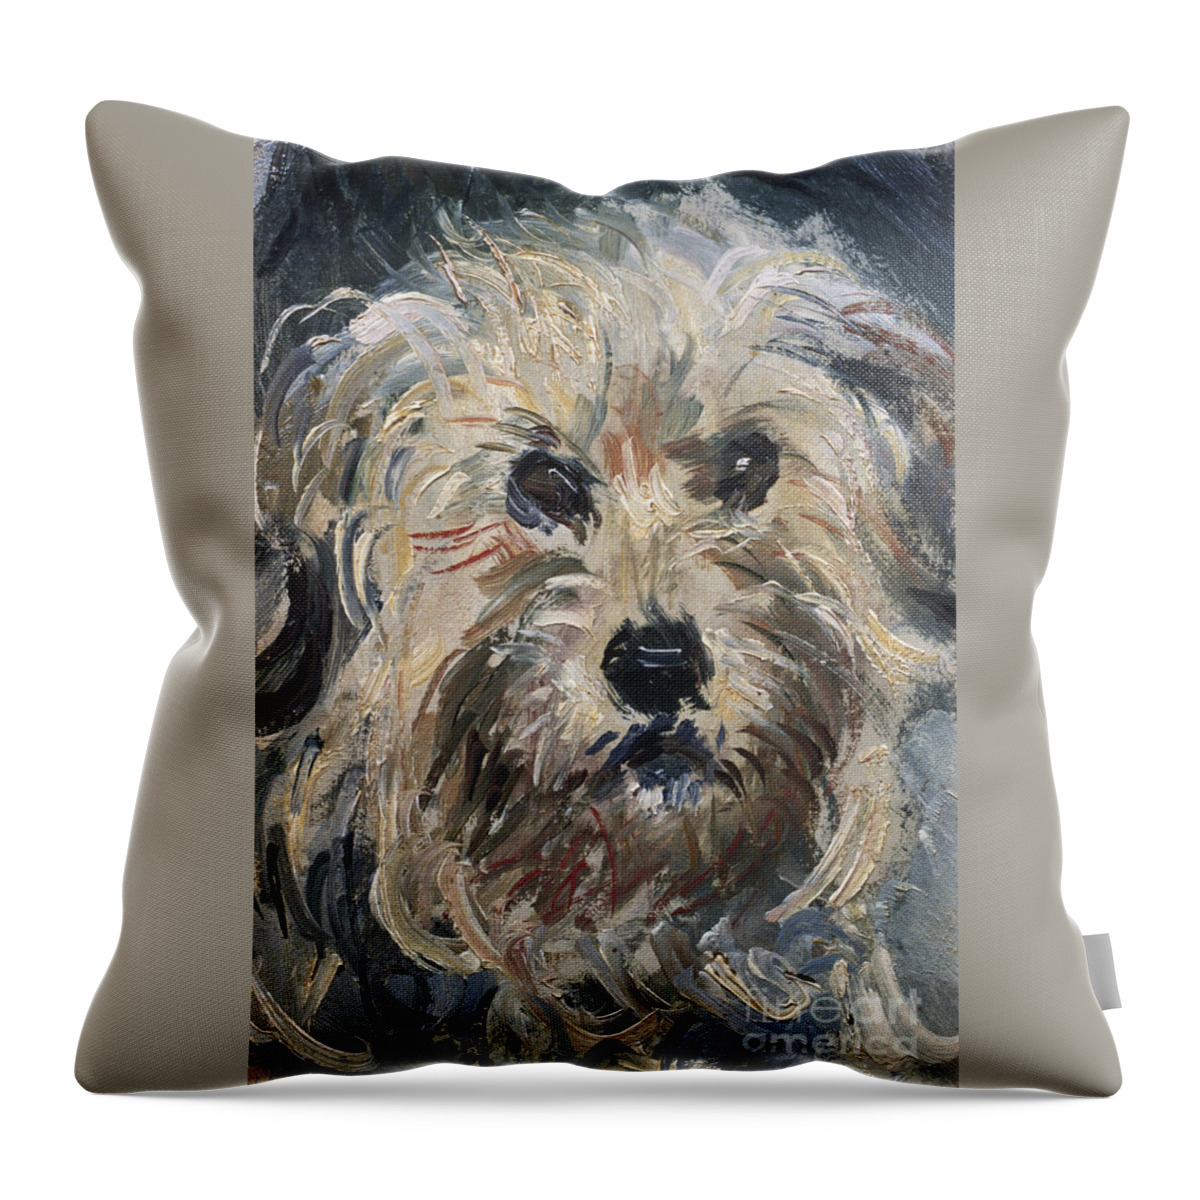 Claude Throw Pillow featuring the painting Yorkshire Terrier by Celestial Images